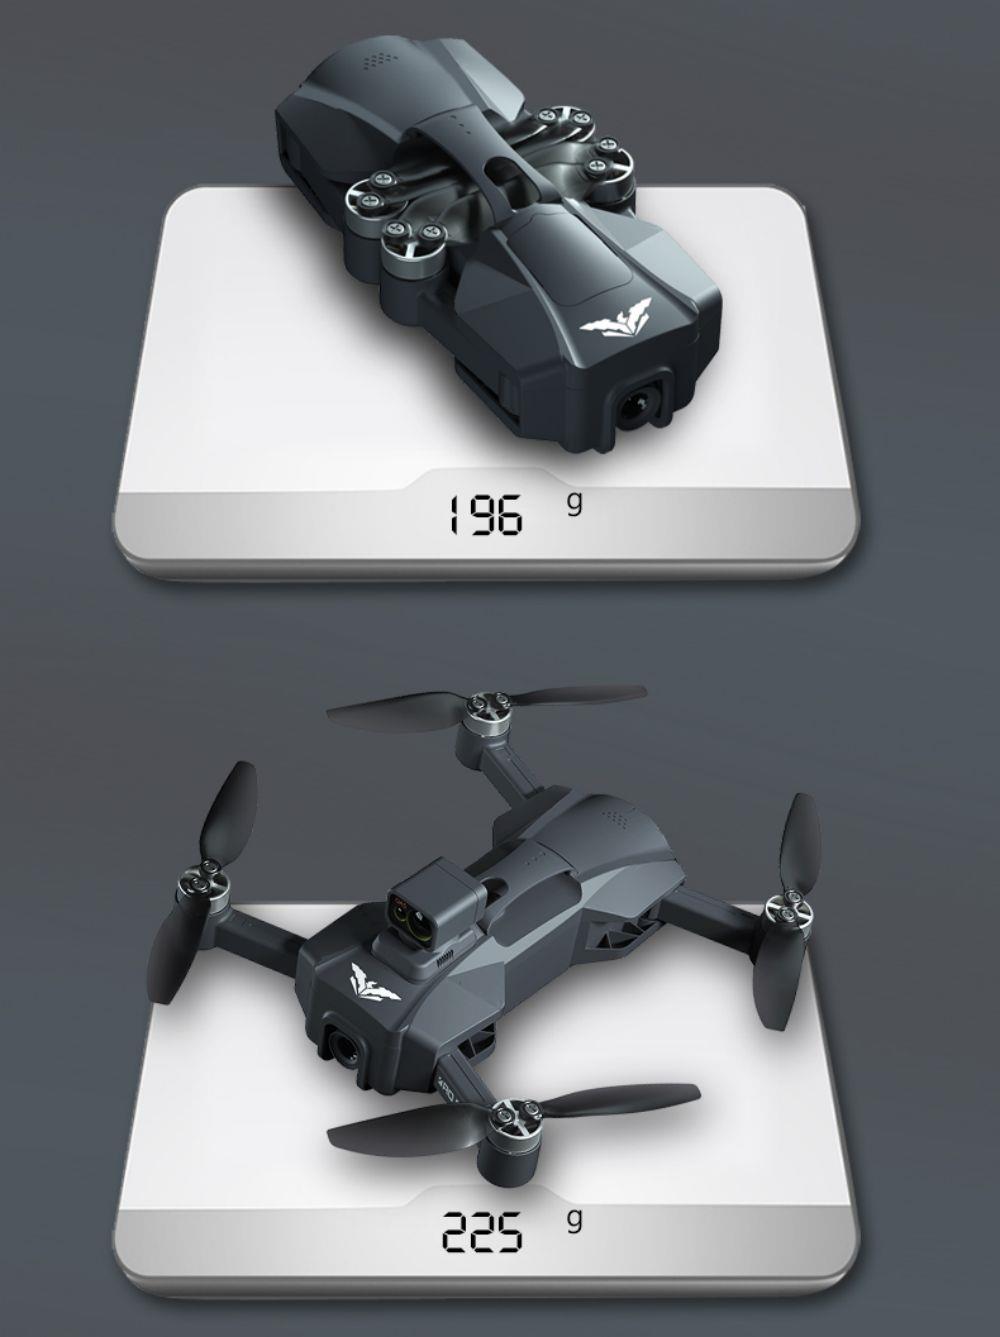 JJRC X23 RC Drone 360 Obstacle Avoidance 5G GPS Positioning 4K Dual Camera - Version B Standard Design Two Batteries